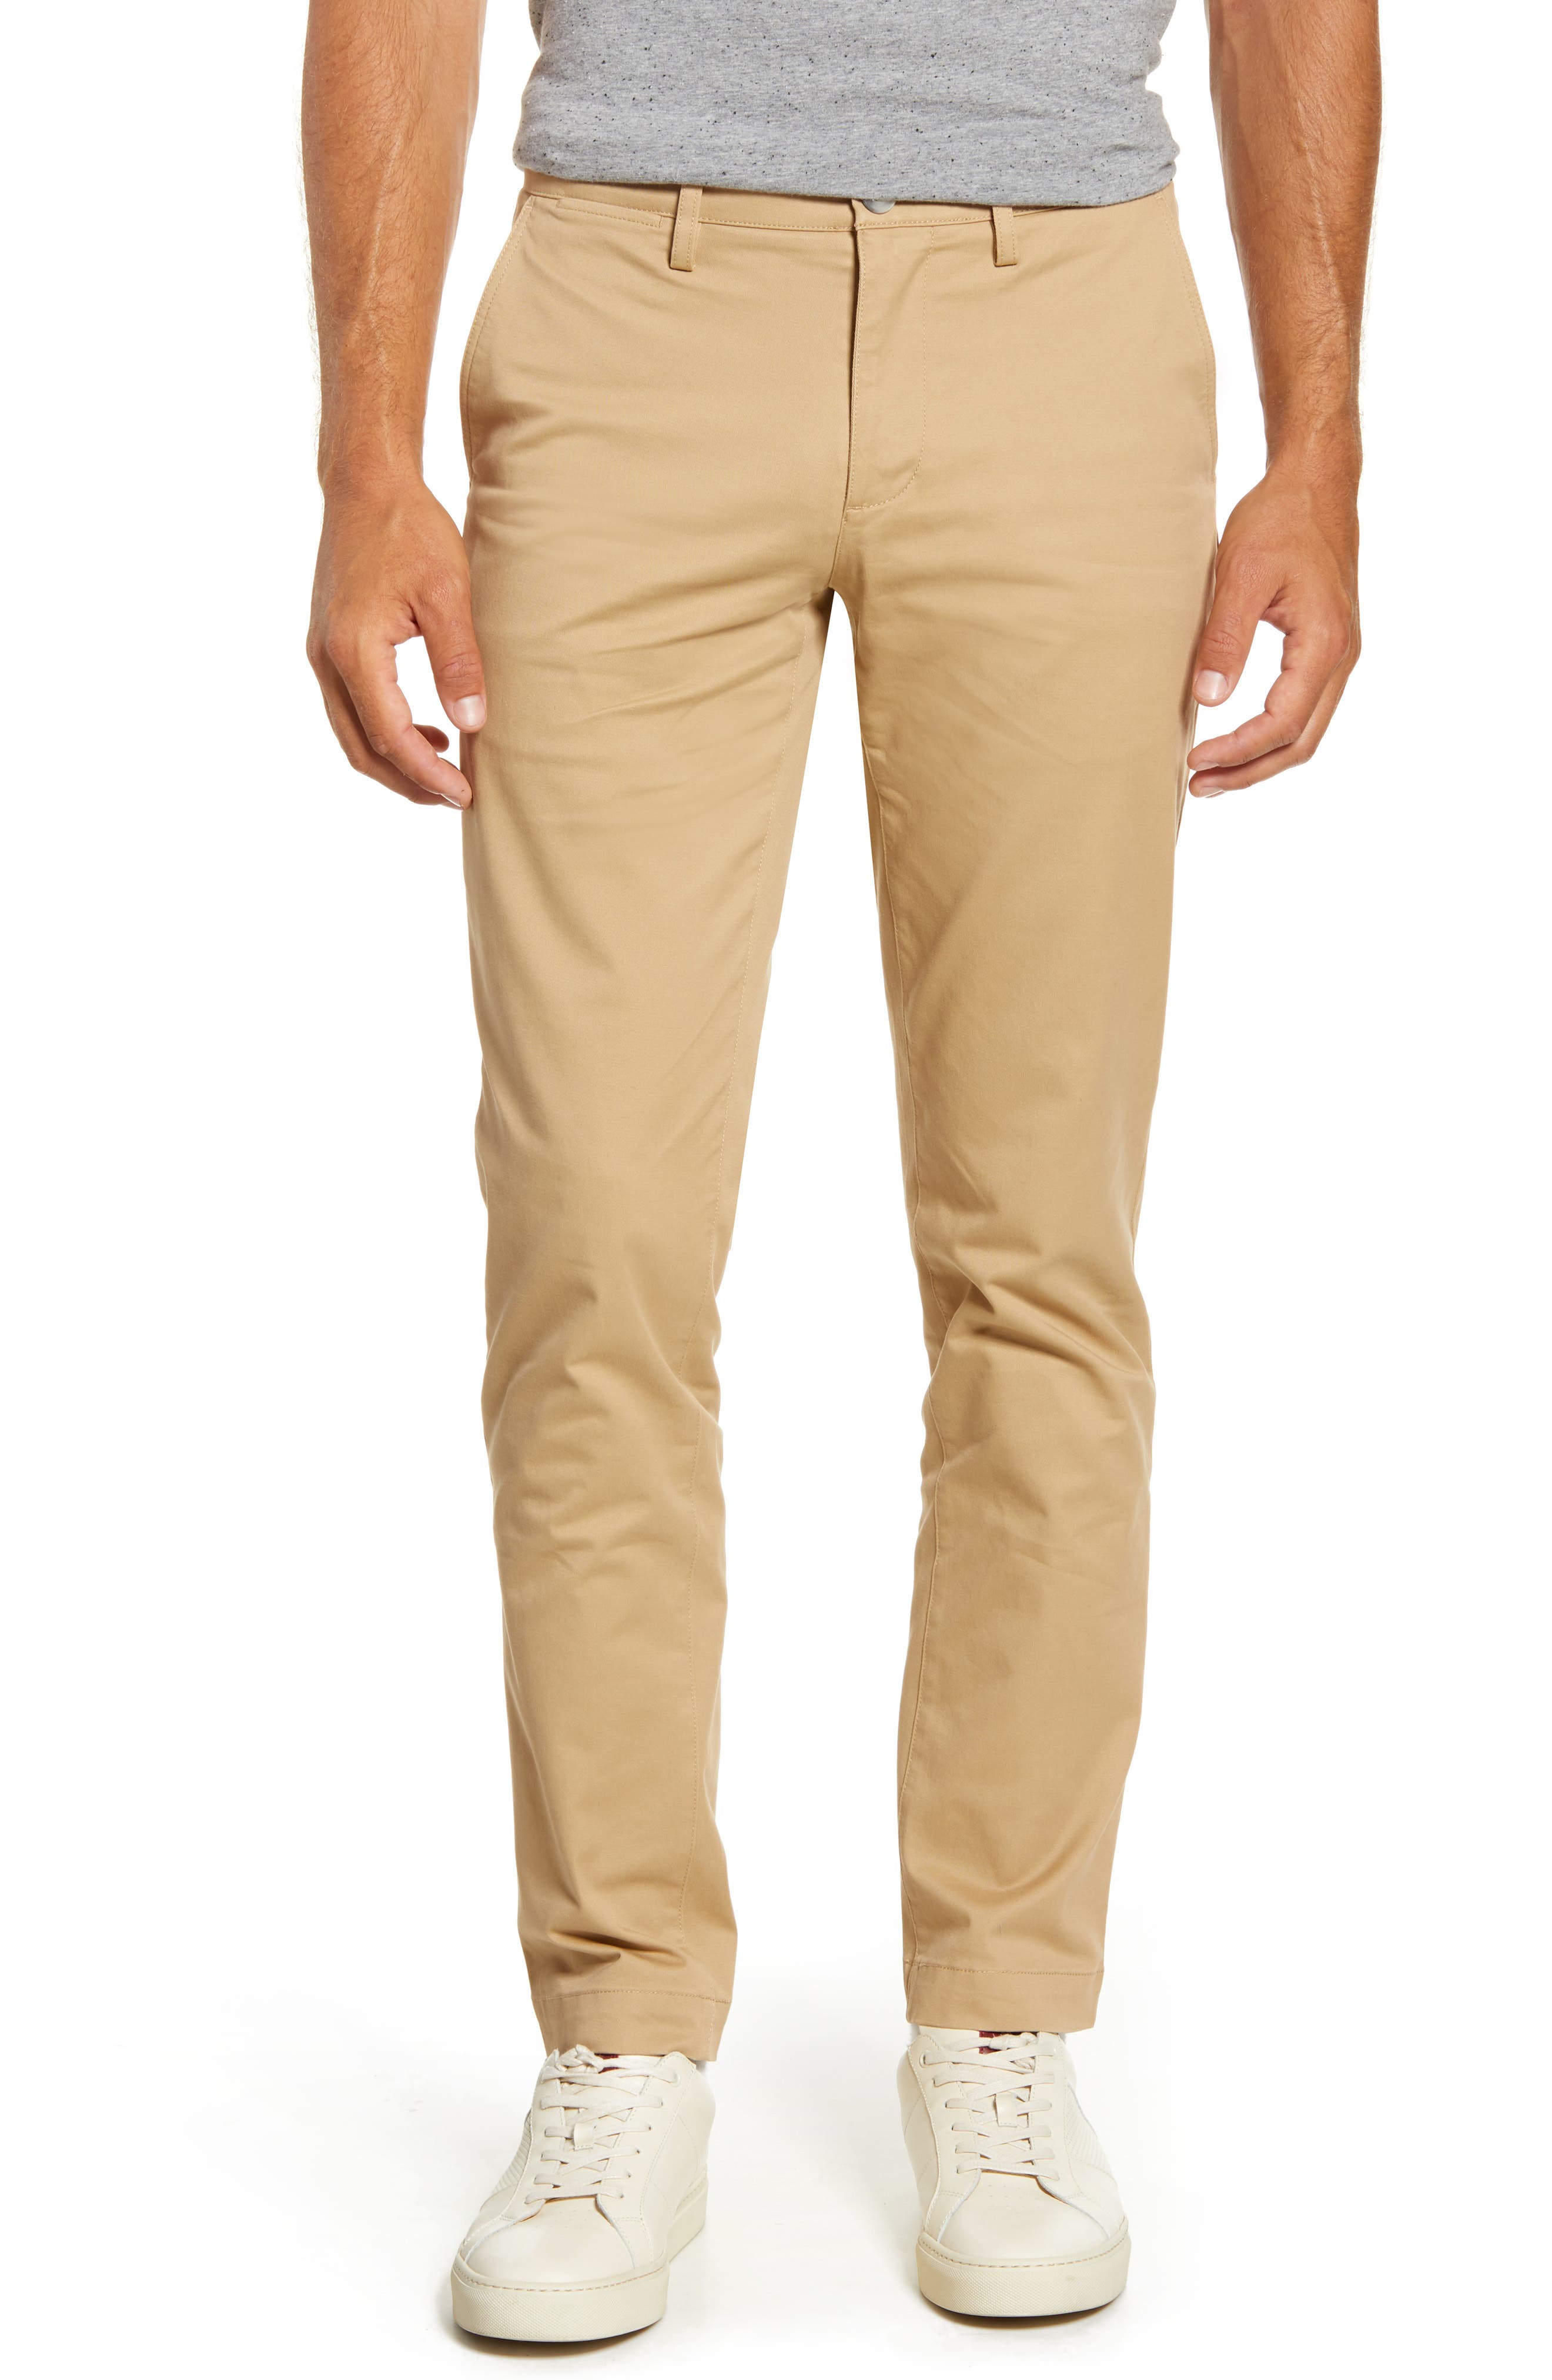 lacoste slim fit chino